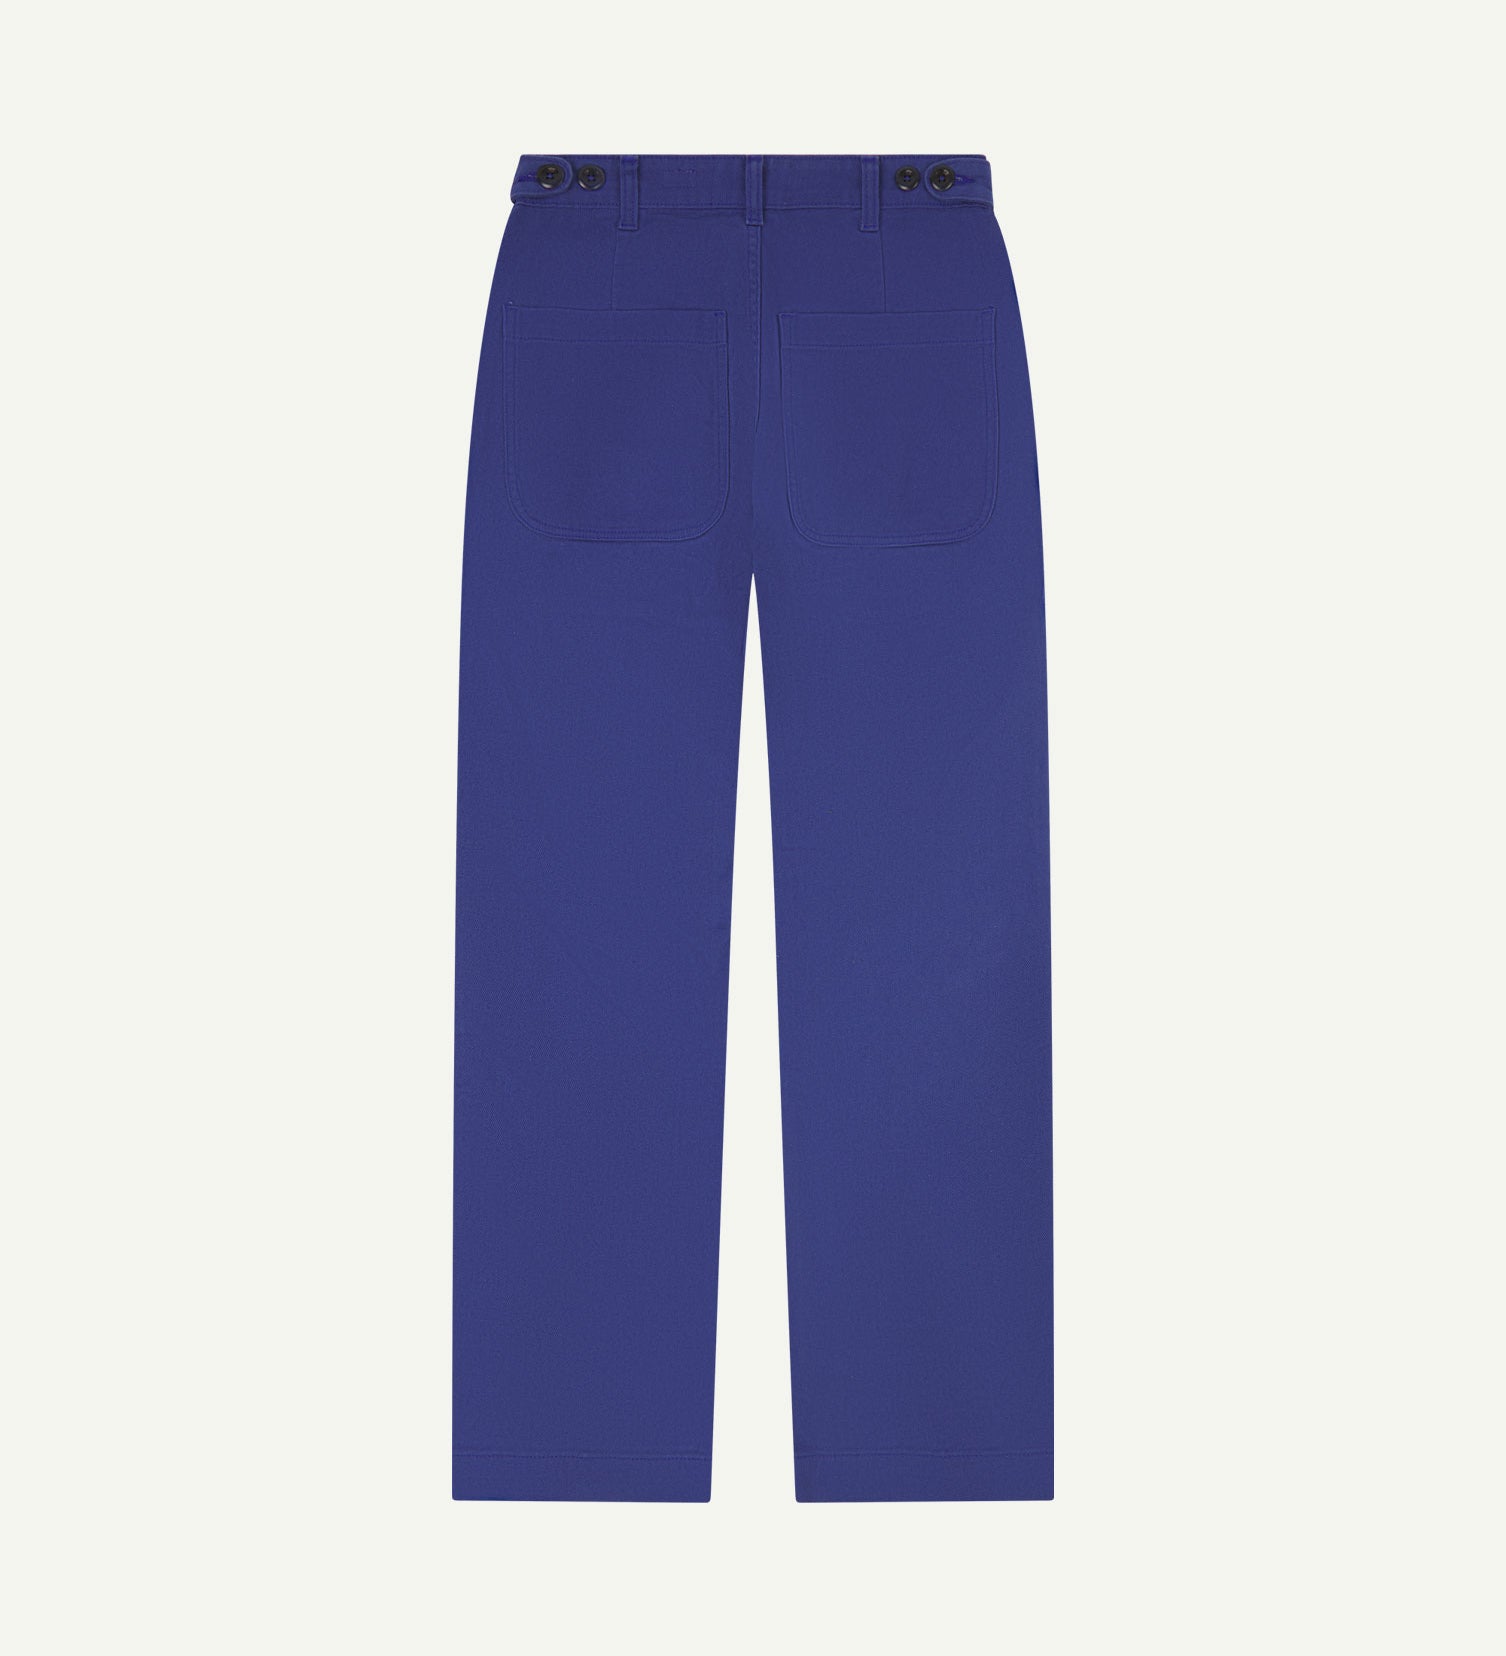 Back flat view of 5013 Uskees drill straight leg pants in ultra blue, with focus on on rear pockets and adjustable waistband with corozo buttons.